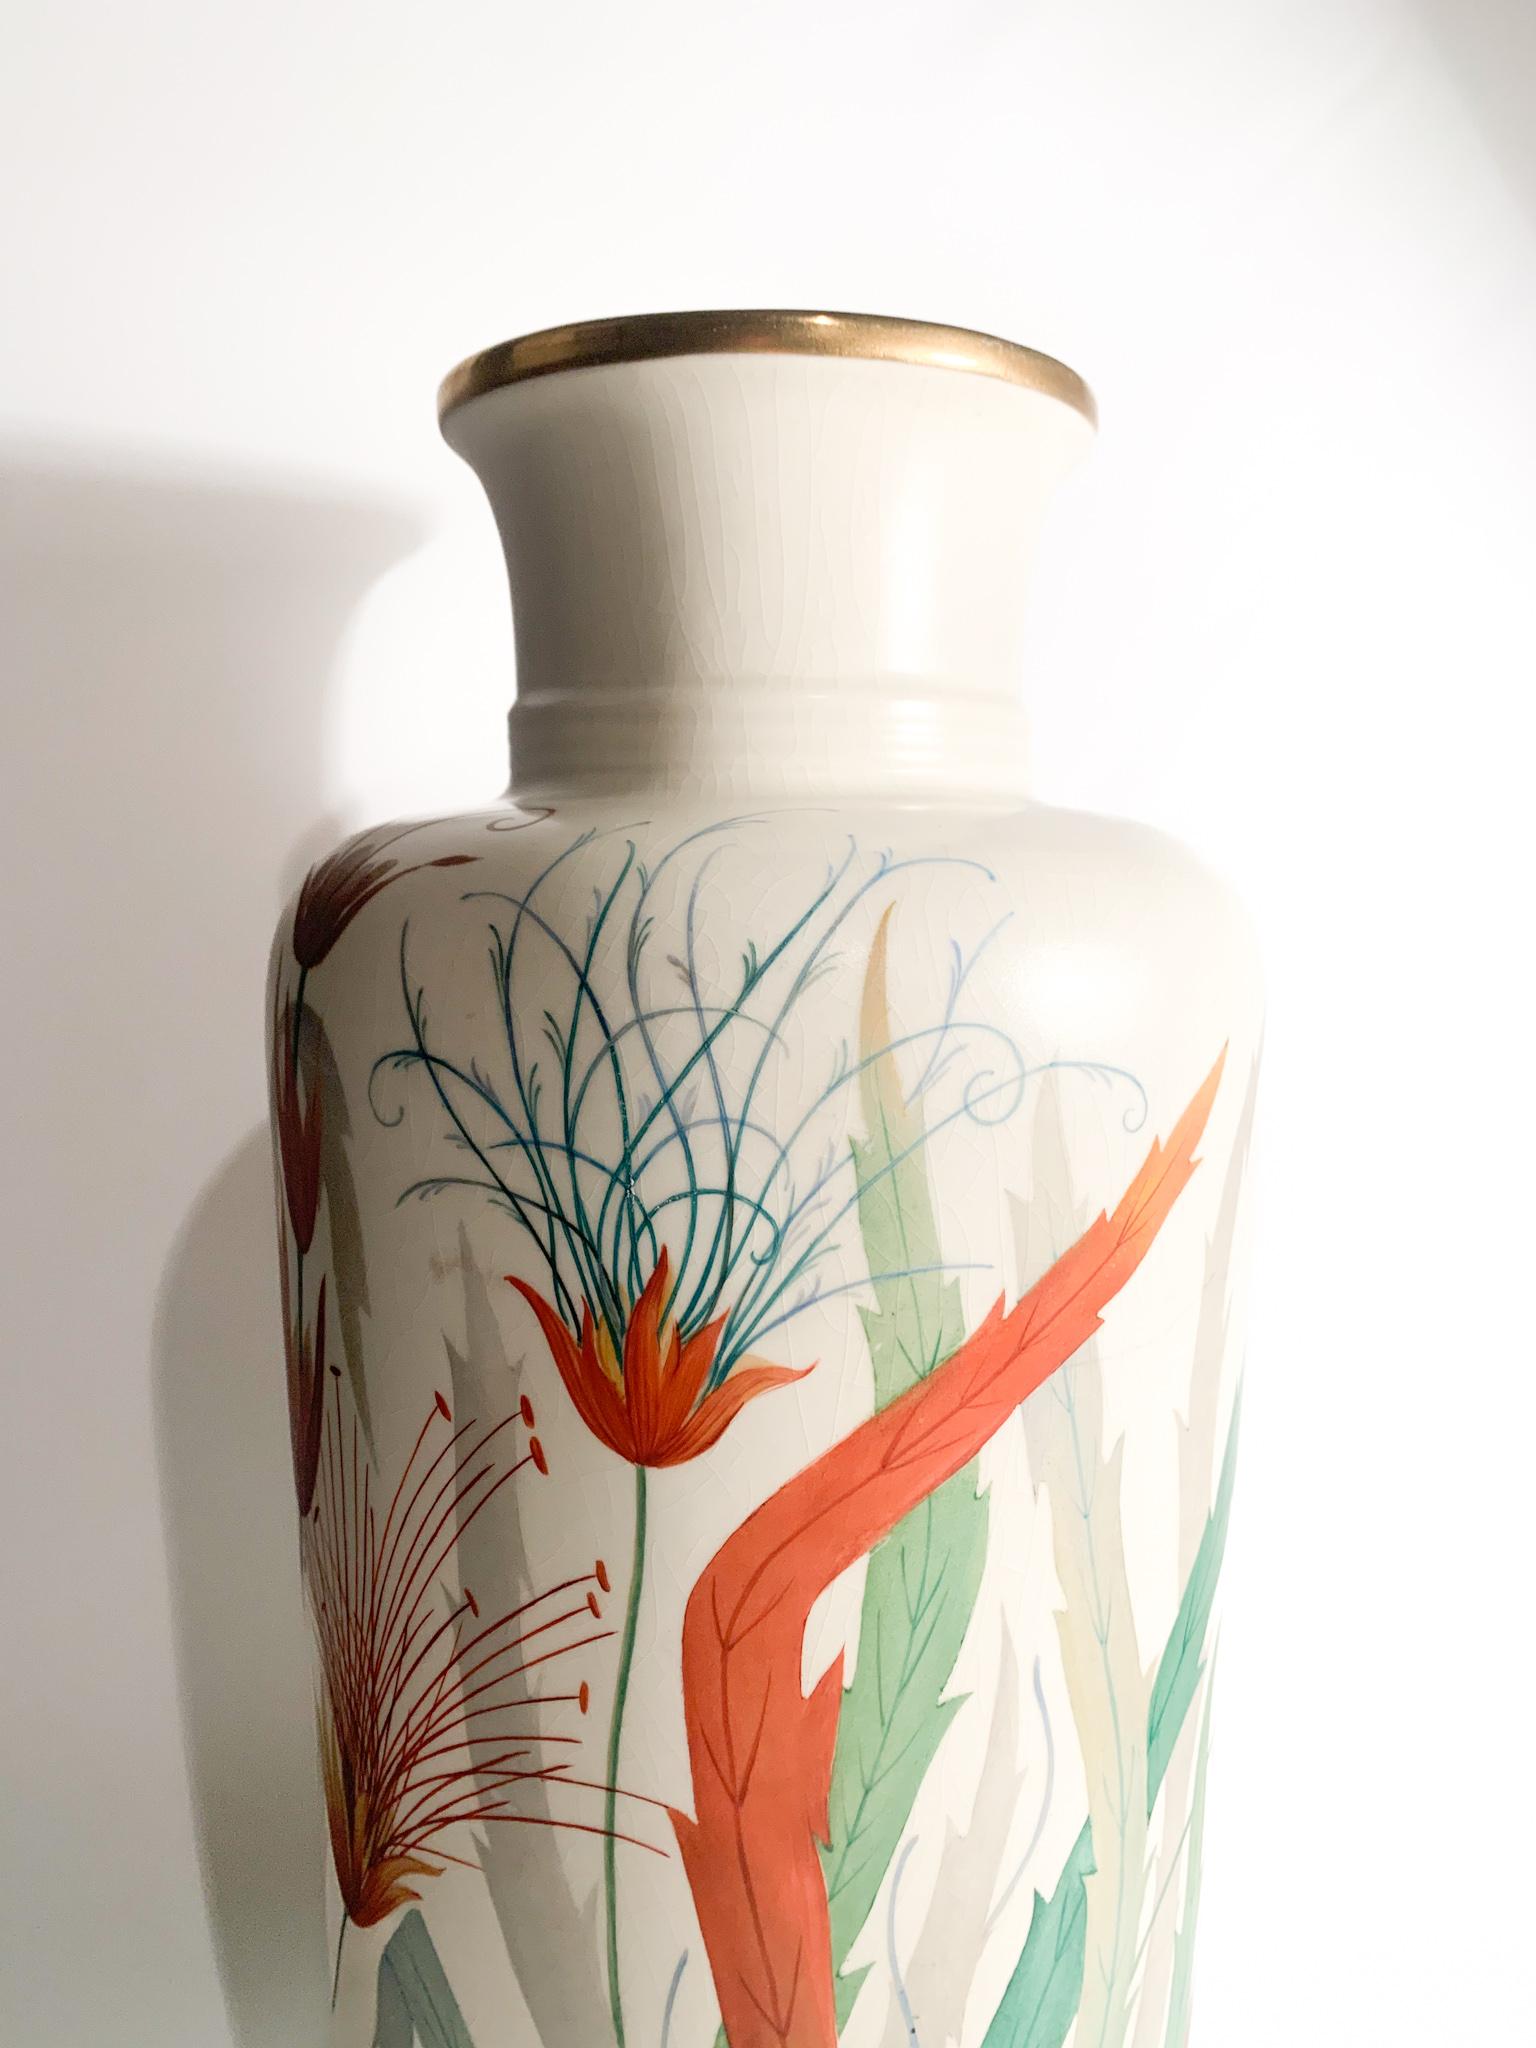 Italian Porcelain Vase by Richard Ginori Hand Painted from the 1920s For Sale